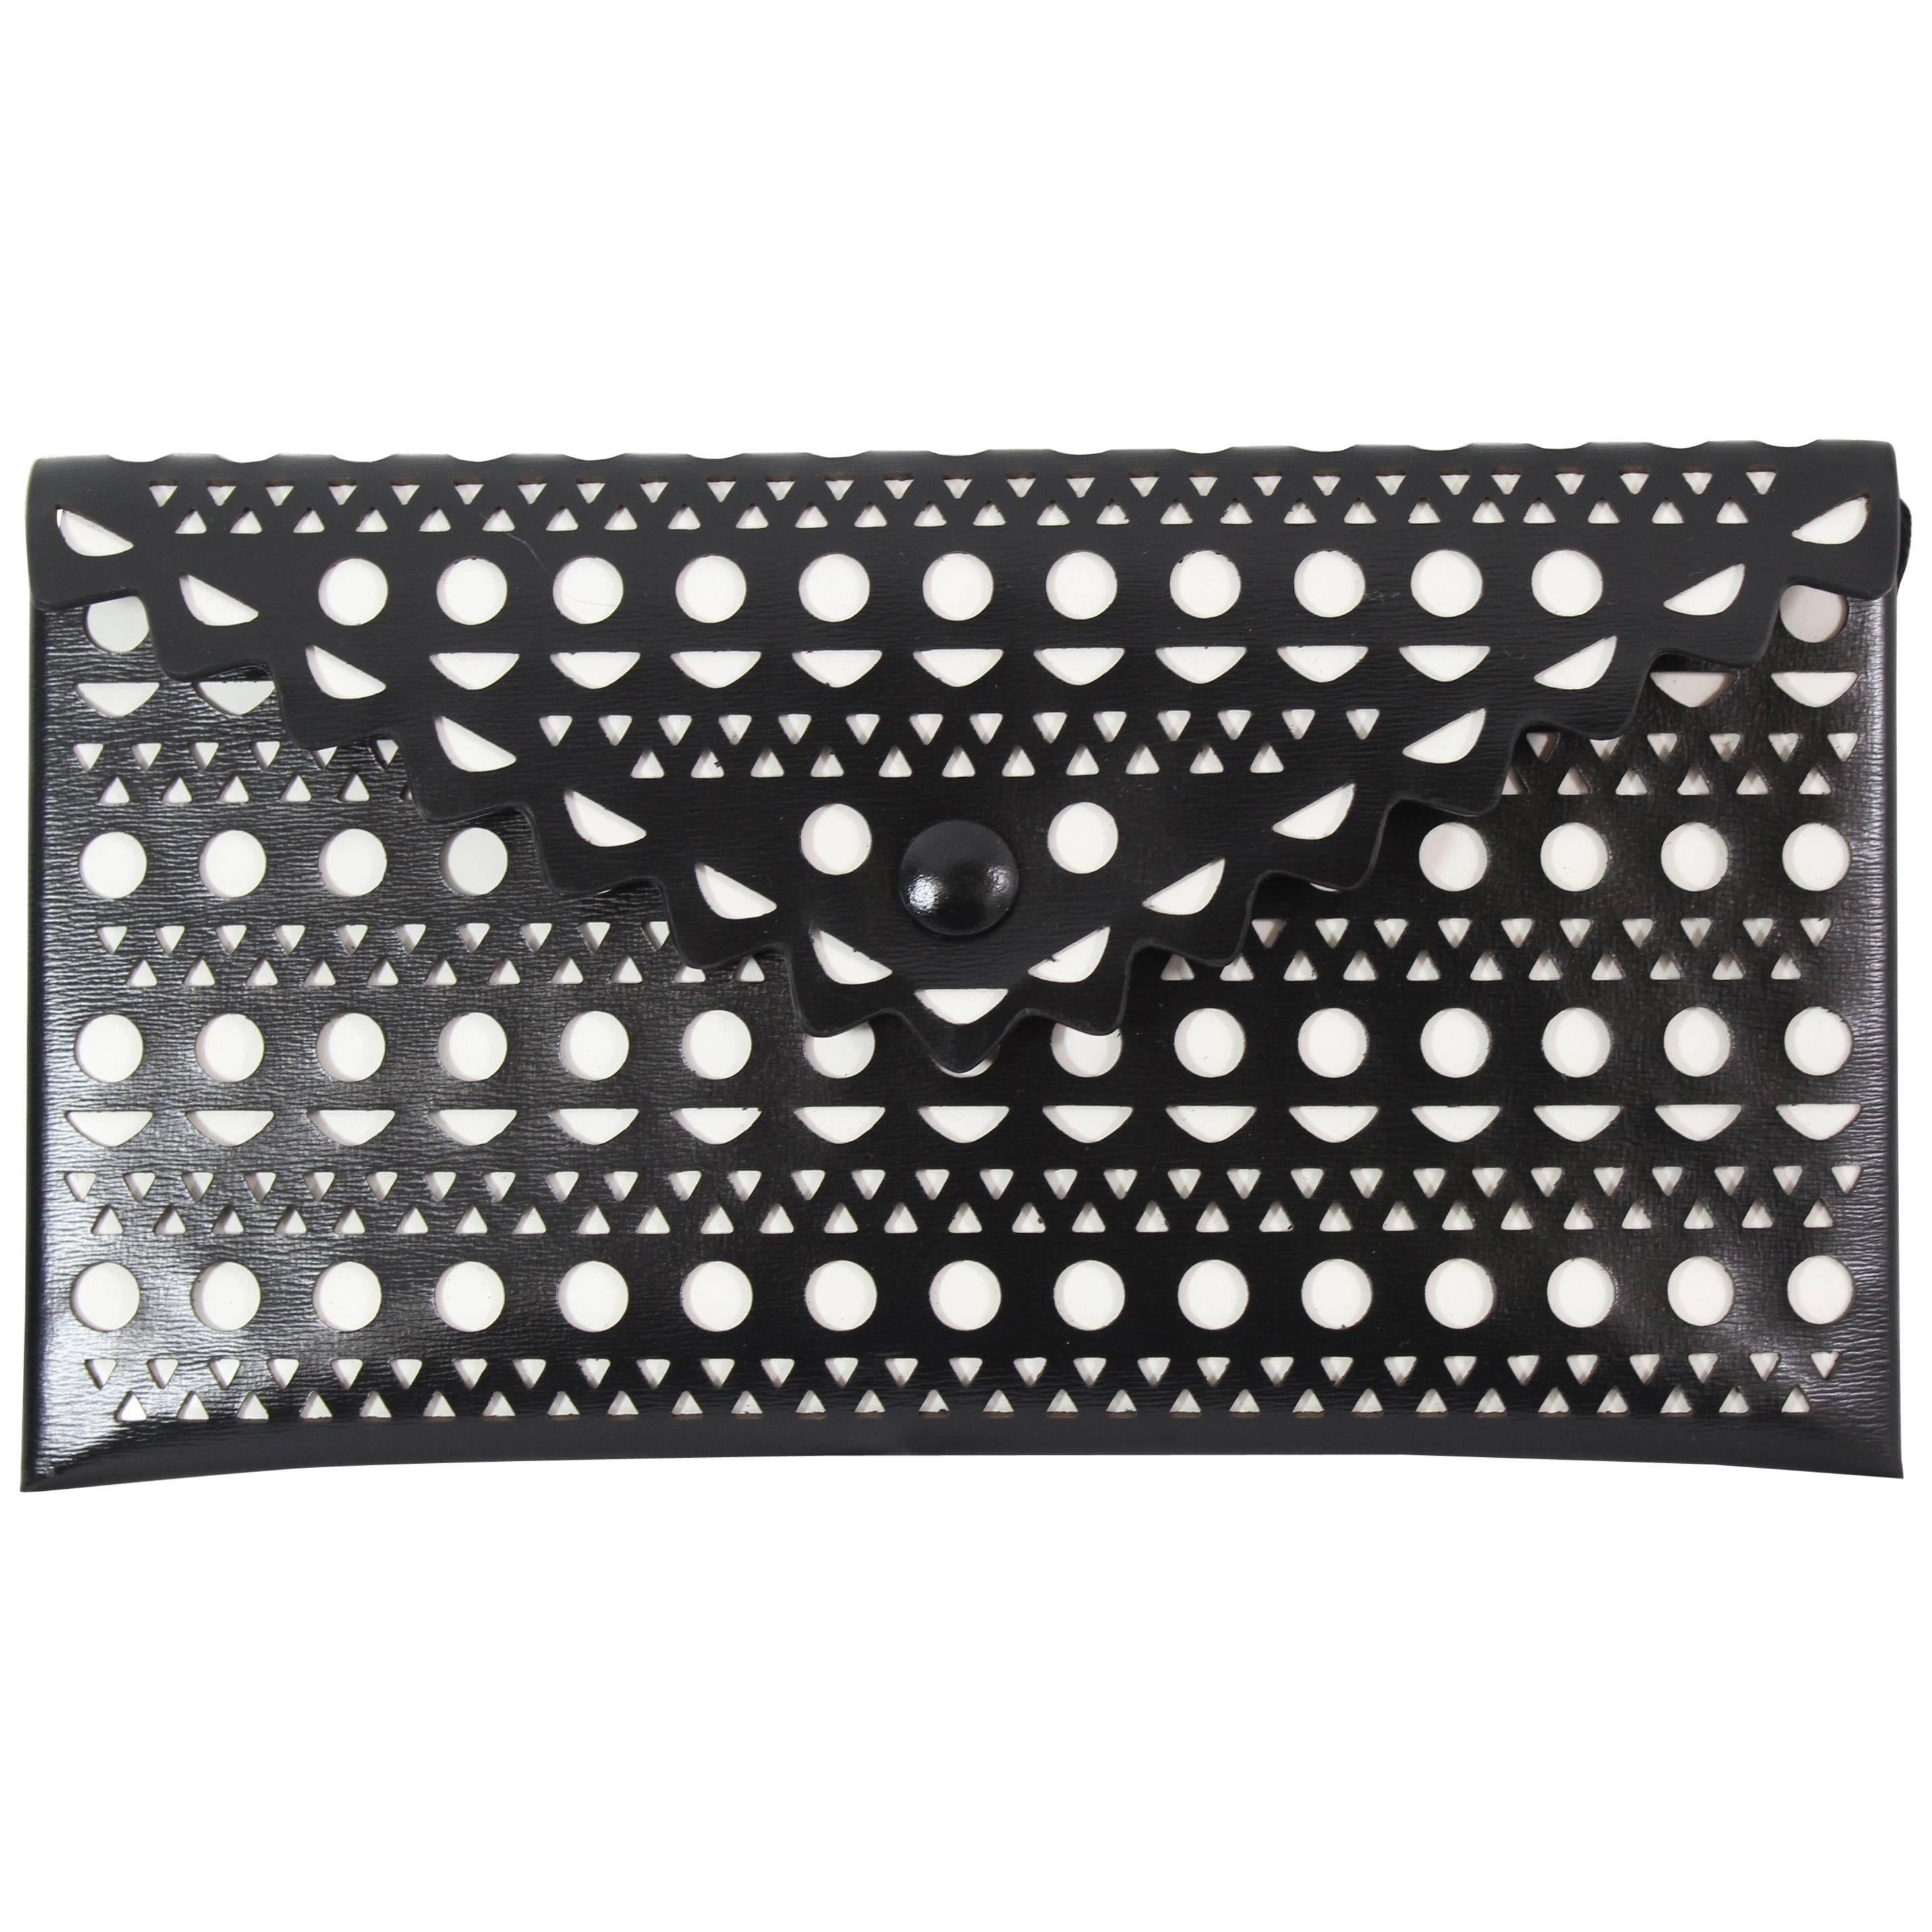 Alaia Small Perforated Pouch / Cluth. New in Box